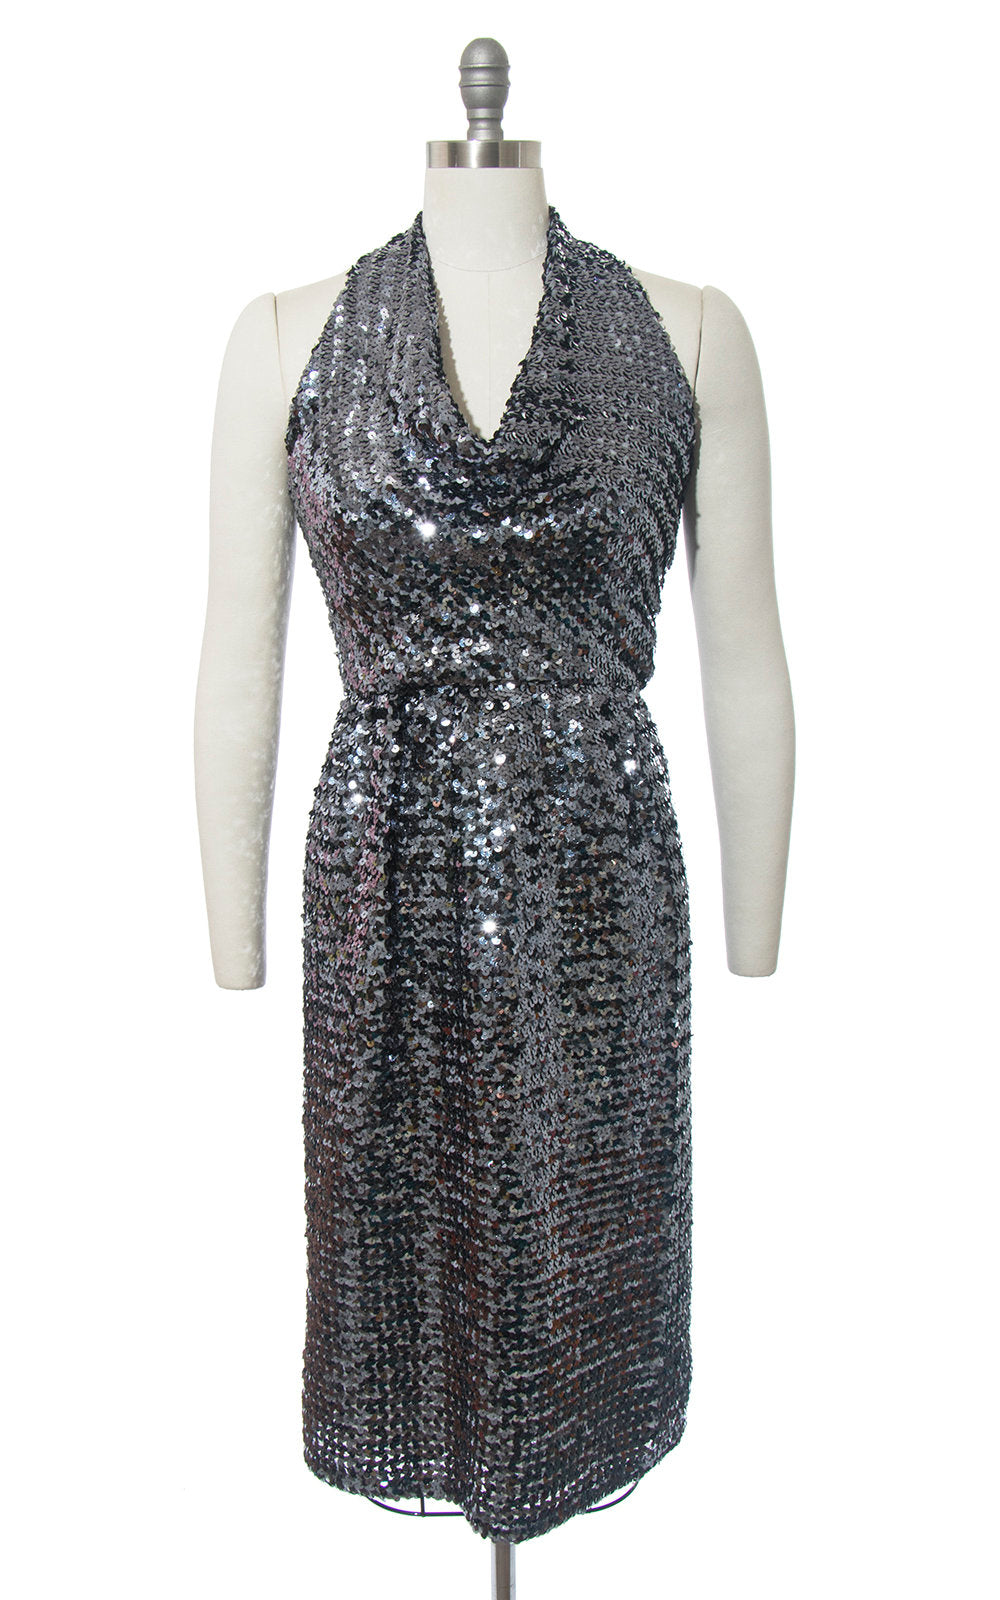 Vintage 1970s Dress | 70s Sequin Halter Sparkly Silver Cowl Halter Neck Wiggle Party Dress (small)